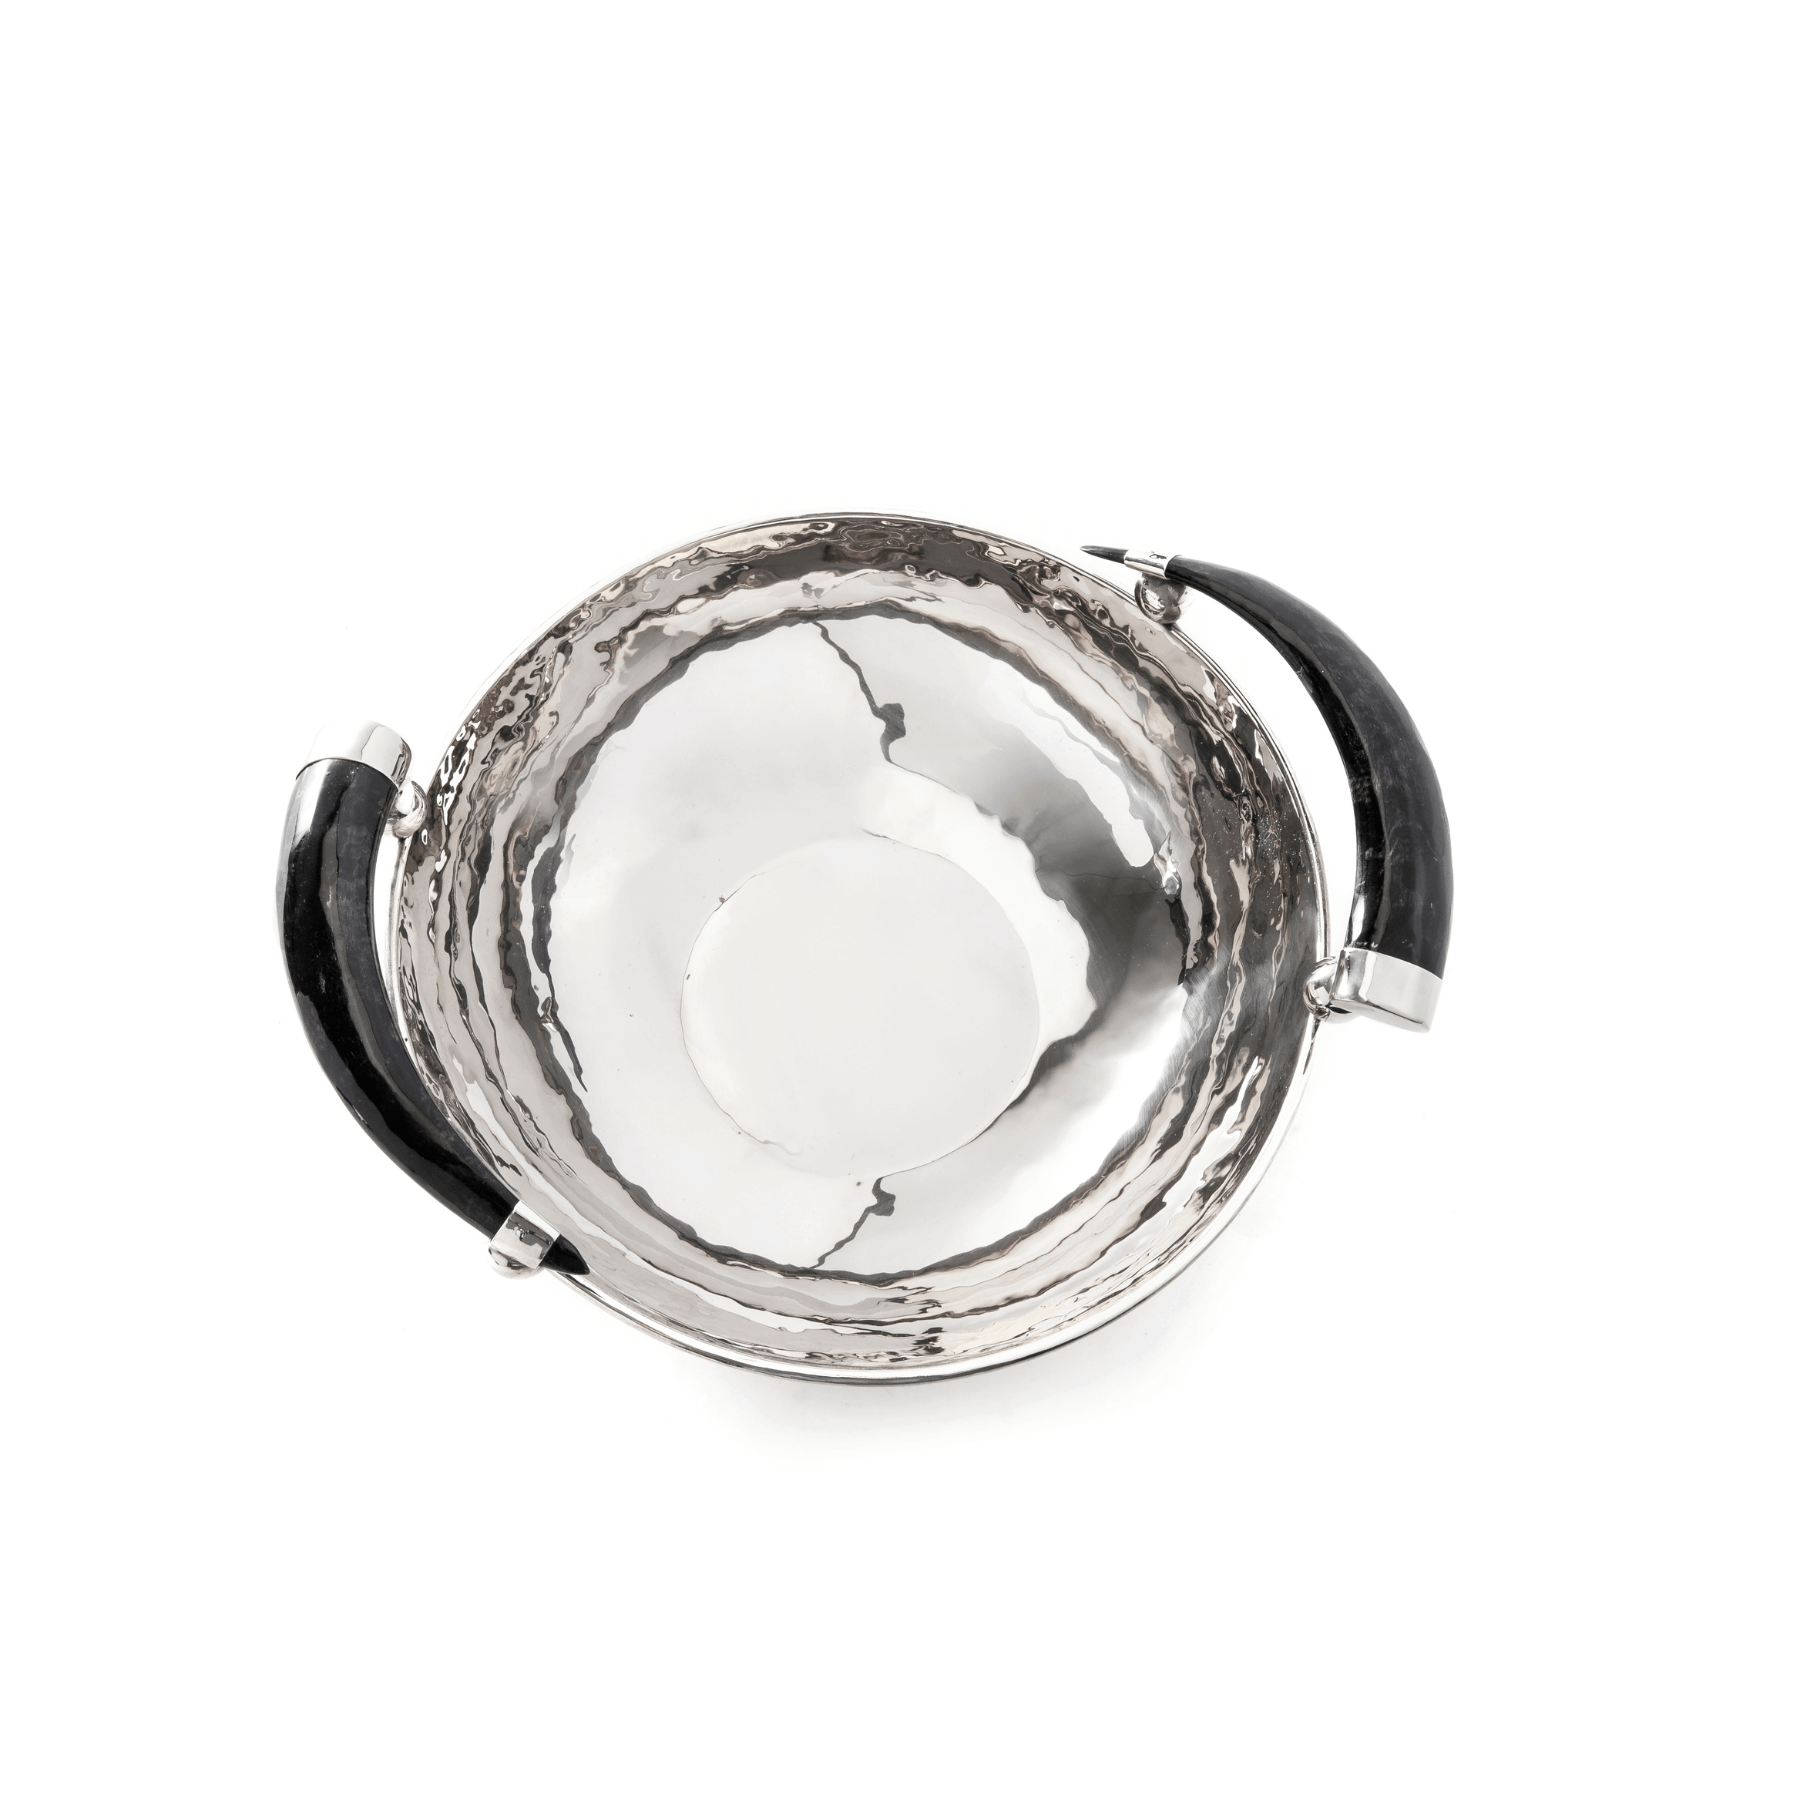 Gaucholife Home German Silver Bowl with Antler Handles